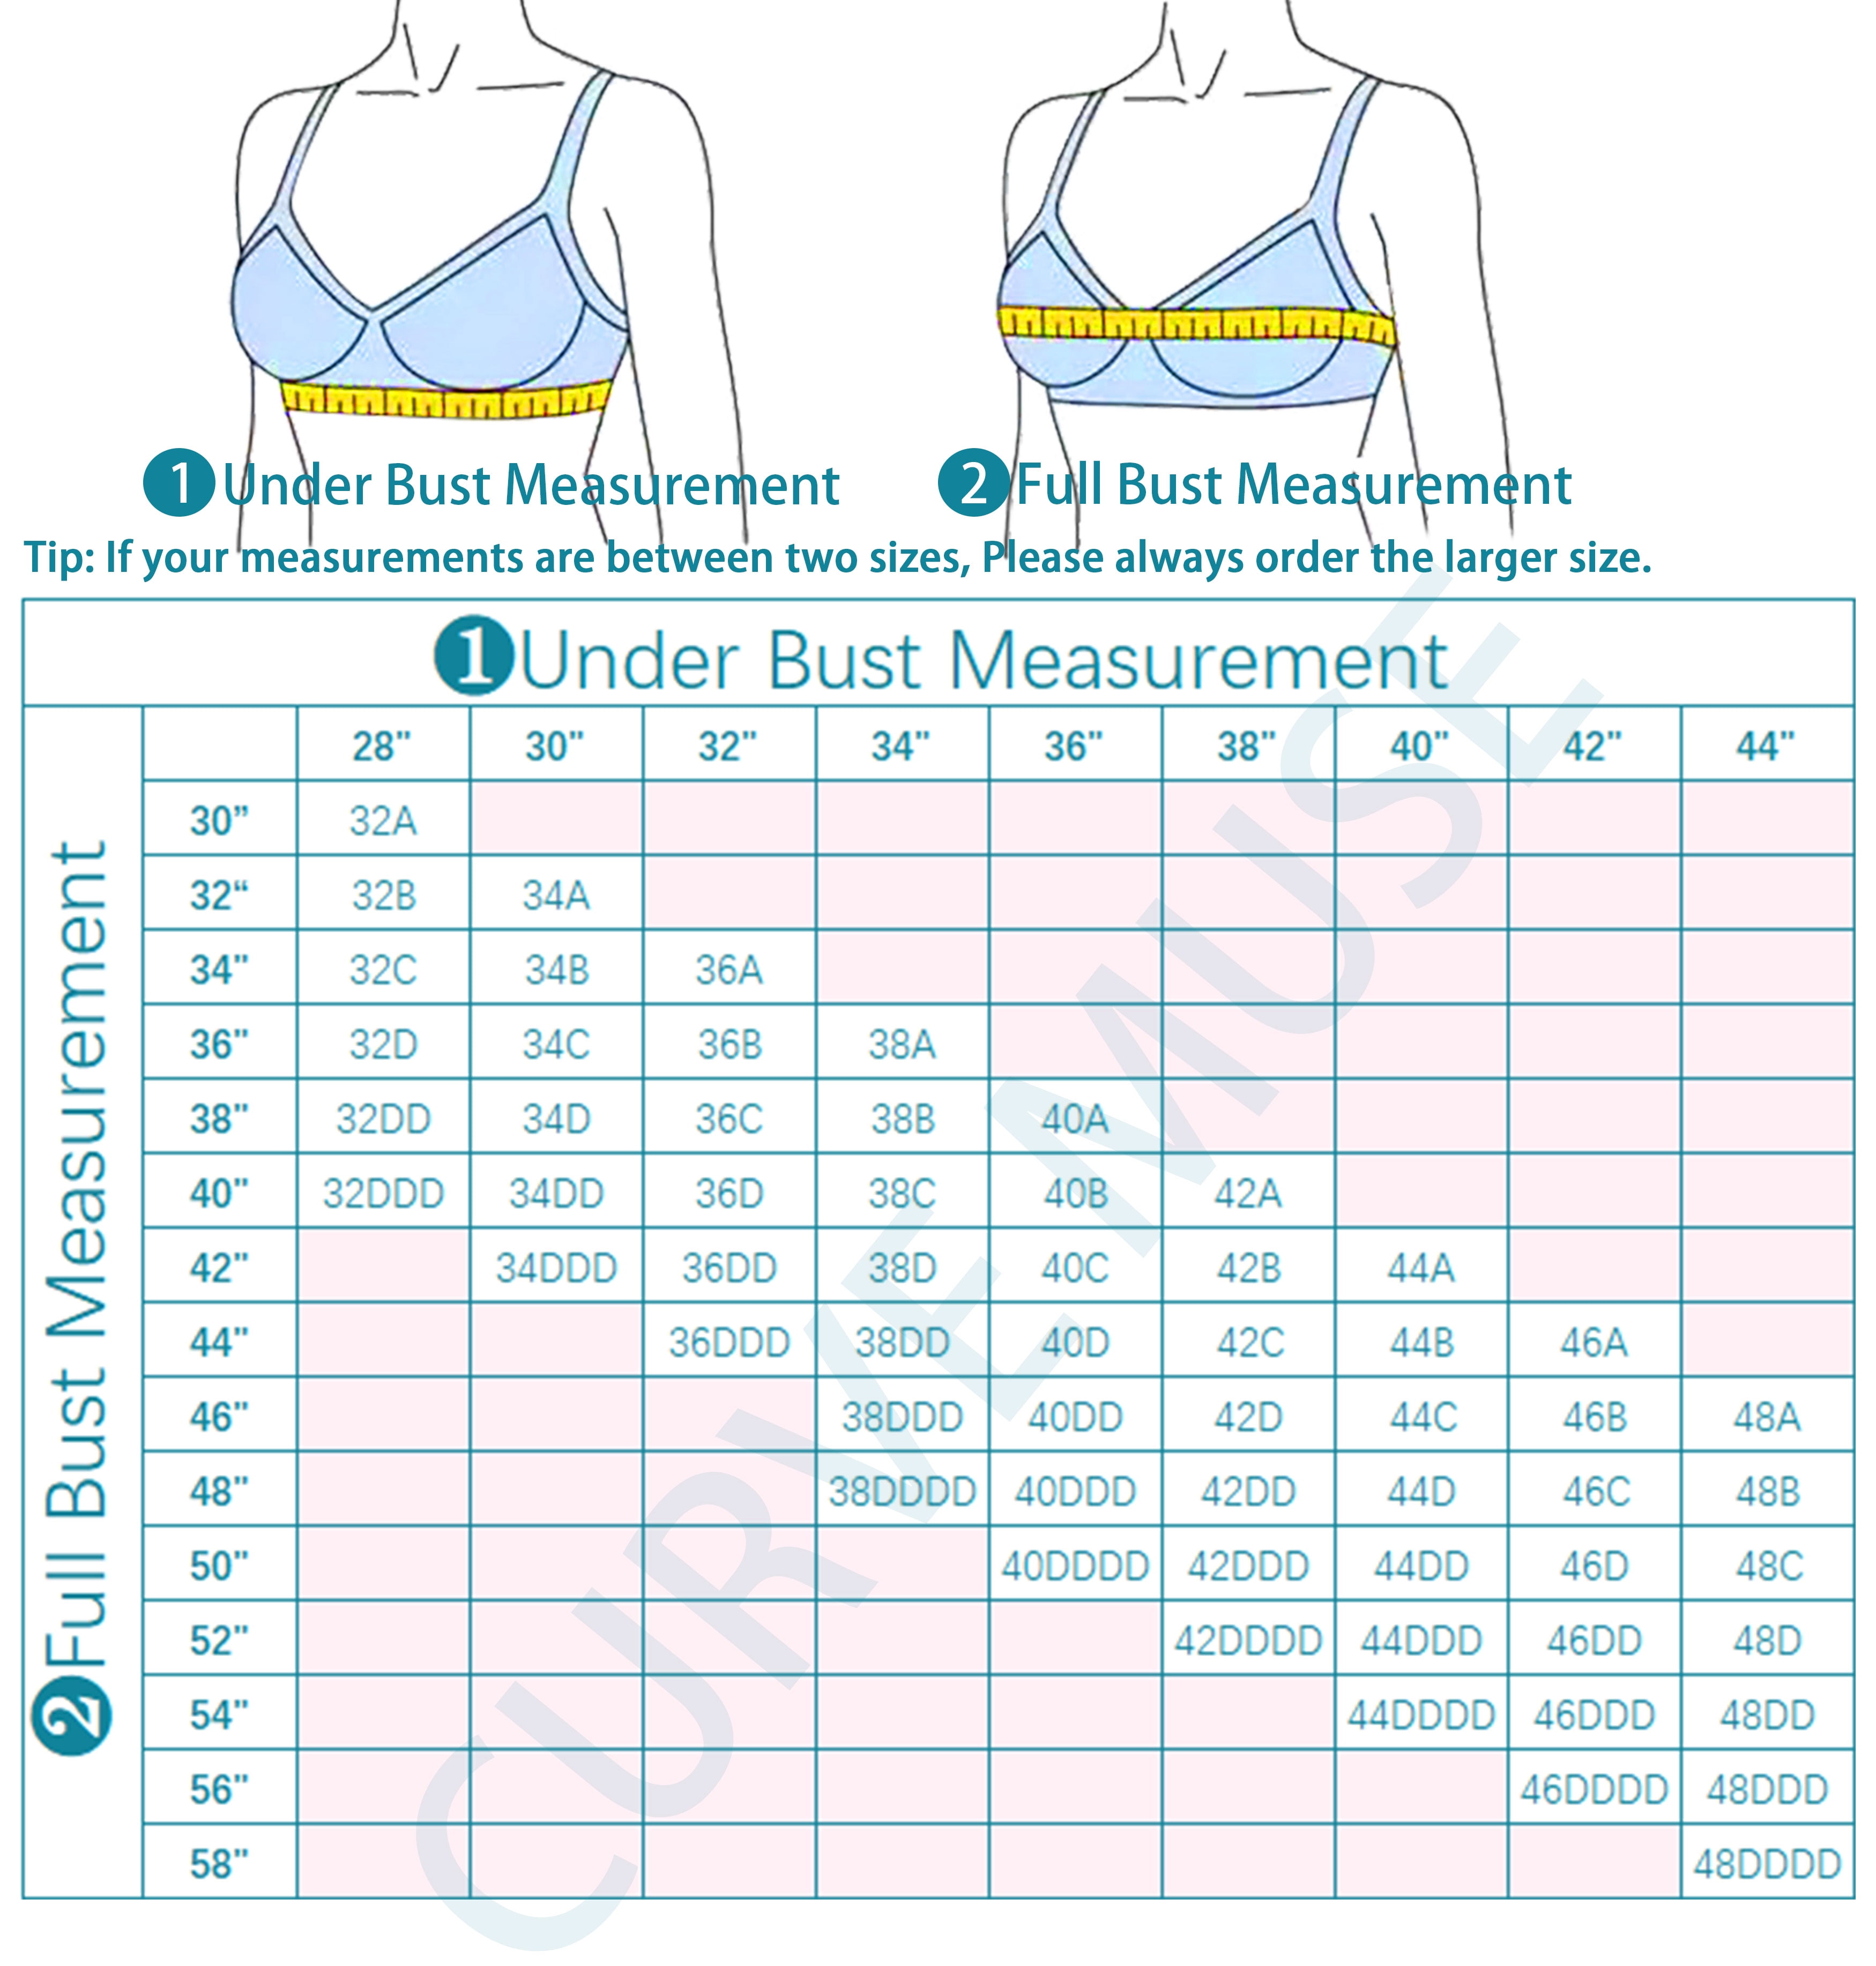 Curve Muse Plus Size Minimizer Underwire Unlined Bra with